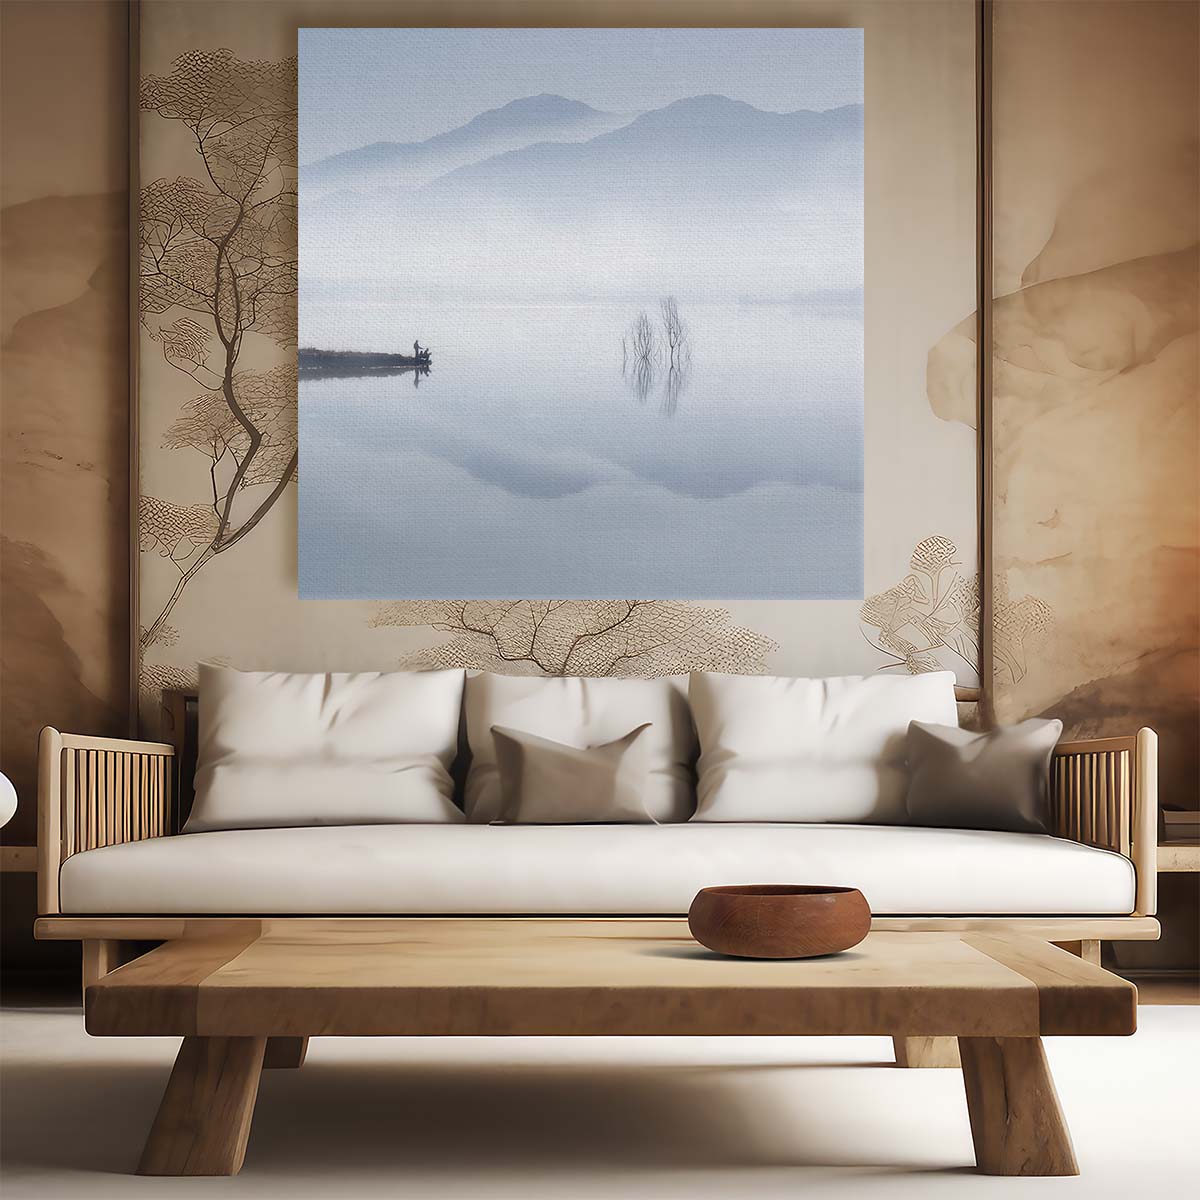 Serene Misty Lake Fishing Pastel Landscape Photography Wall Art by Luxuriance Designs. Made in USA.